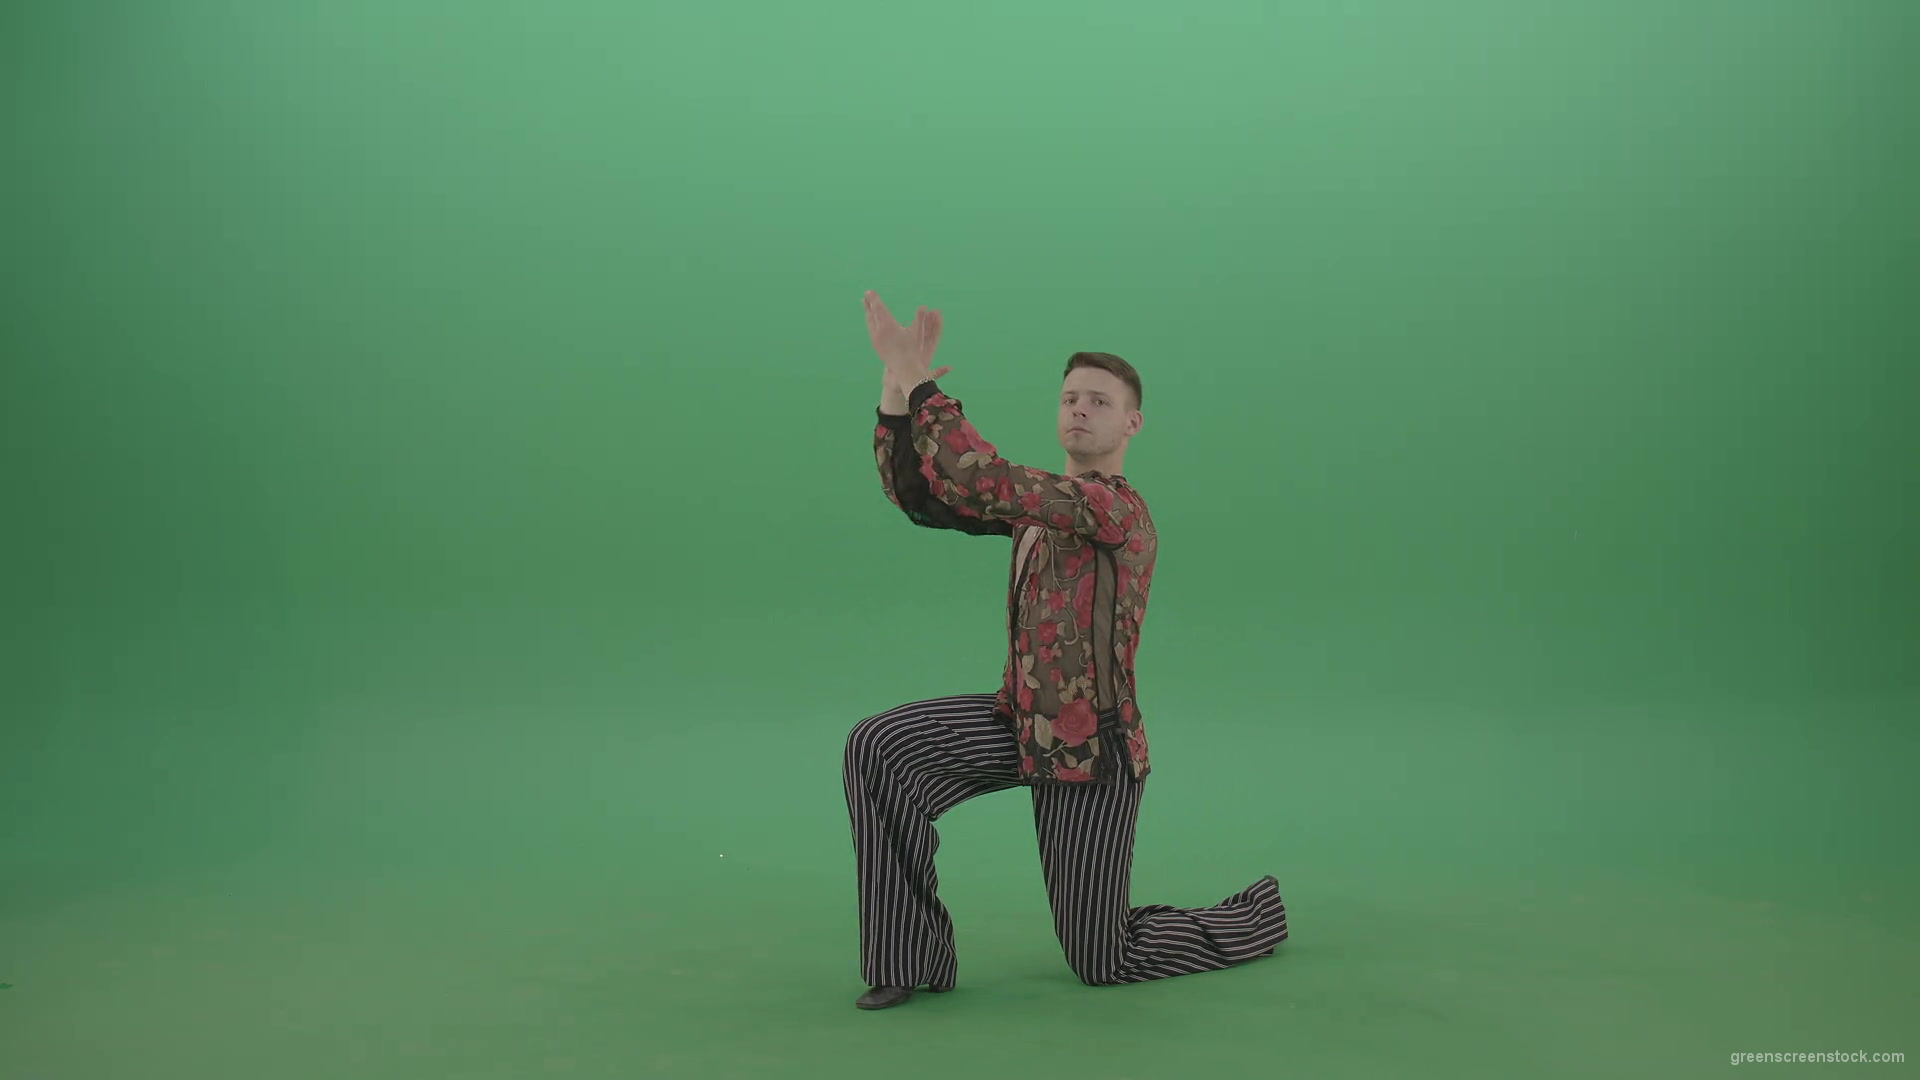 Rumba-Man-get-down-on-one-knees-and-clapping-in-hands-over-green-screen-4K-Video-Footage--1920_004 Green Screen Stock